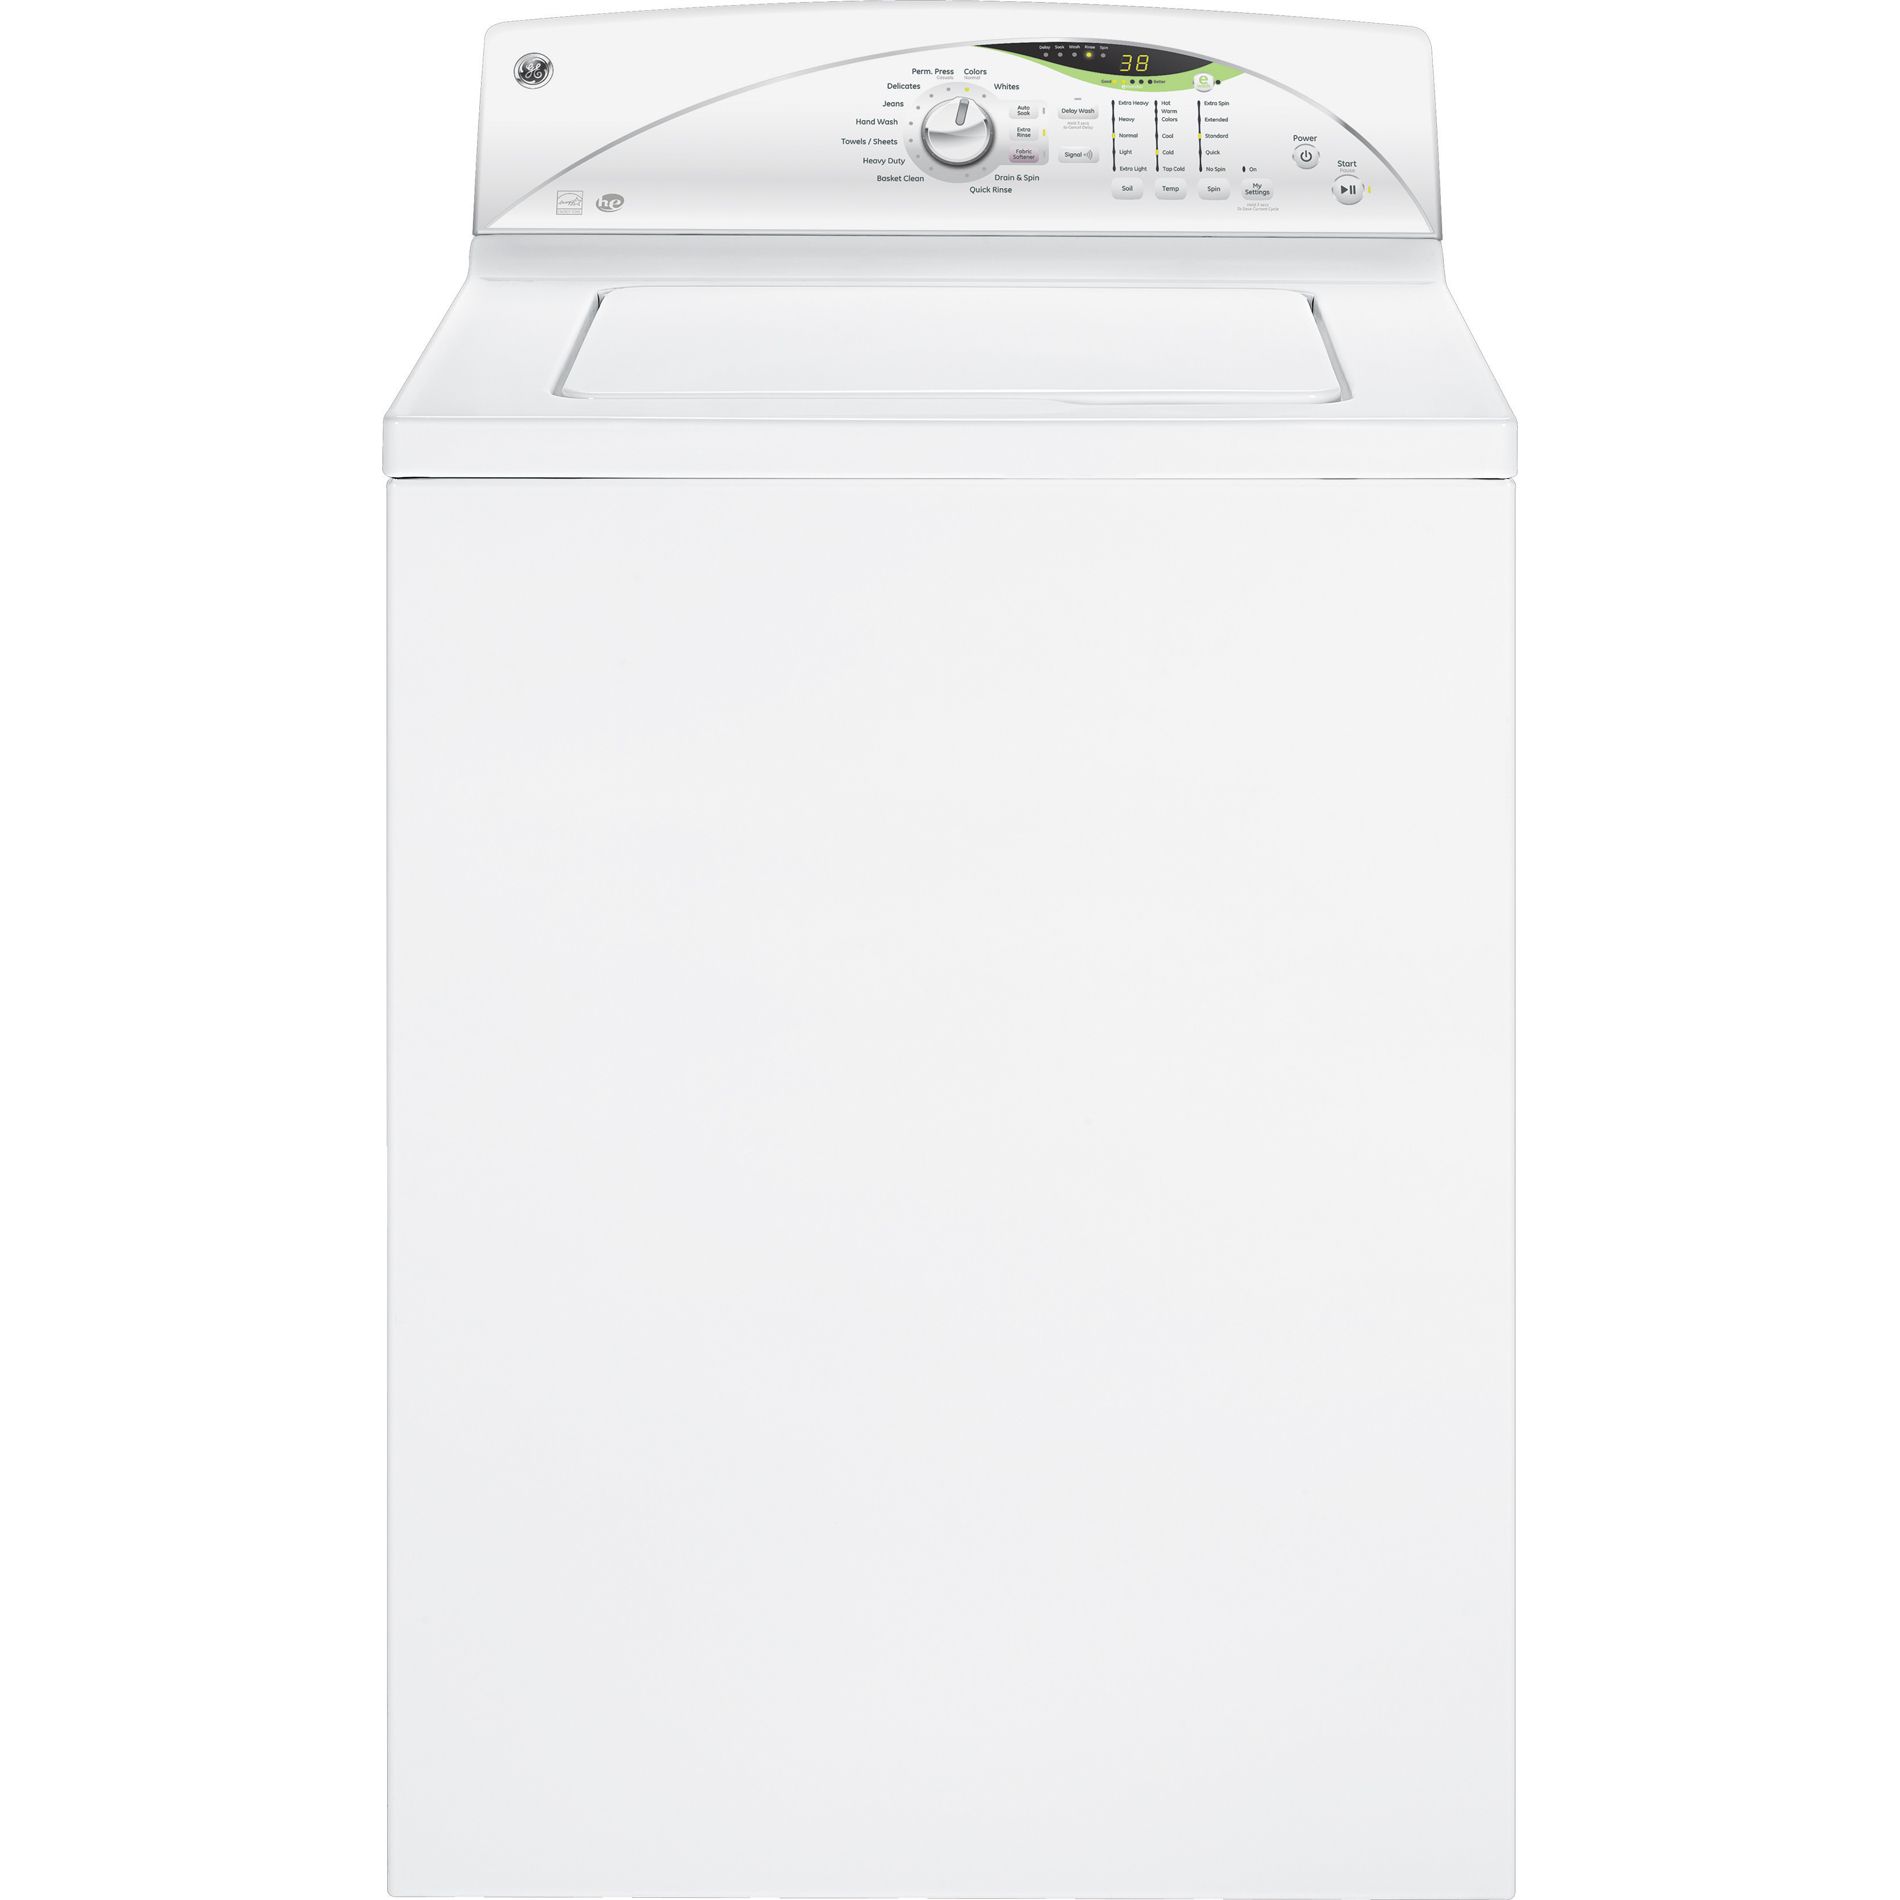 GE 4.0 cu. ft. High-Efficiency Top Load Washer - White